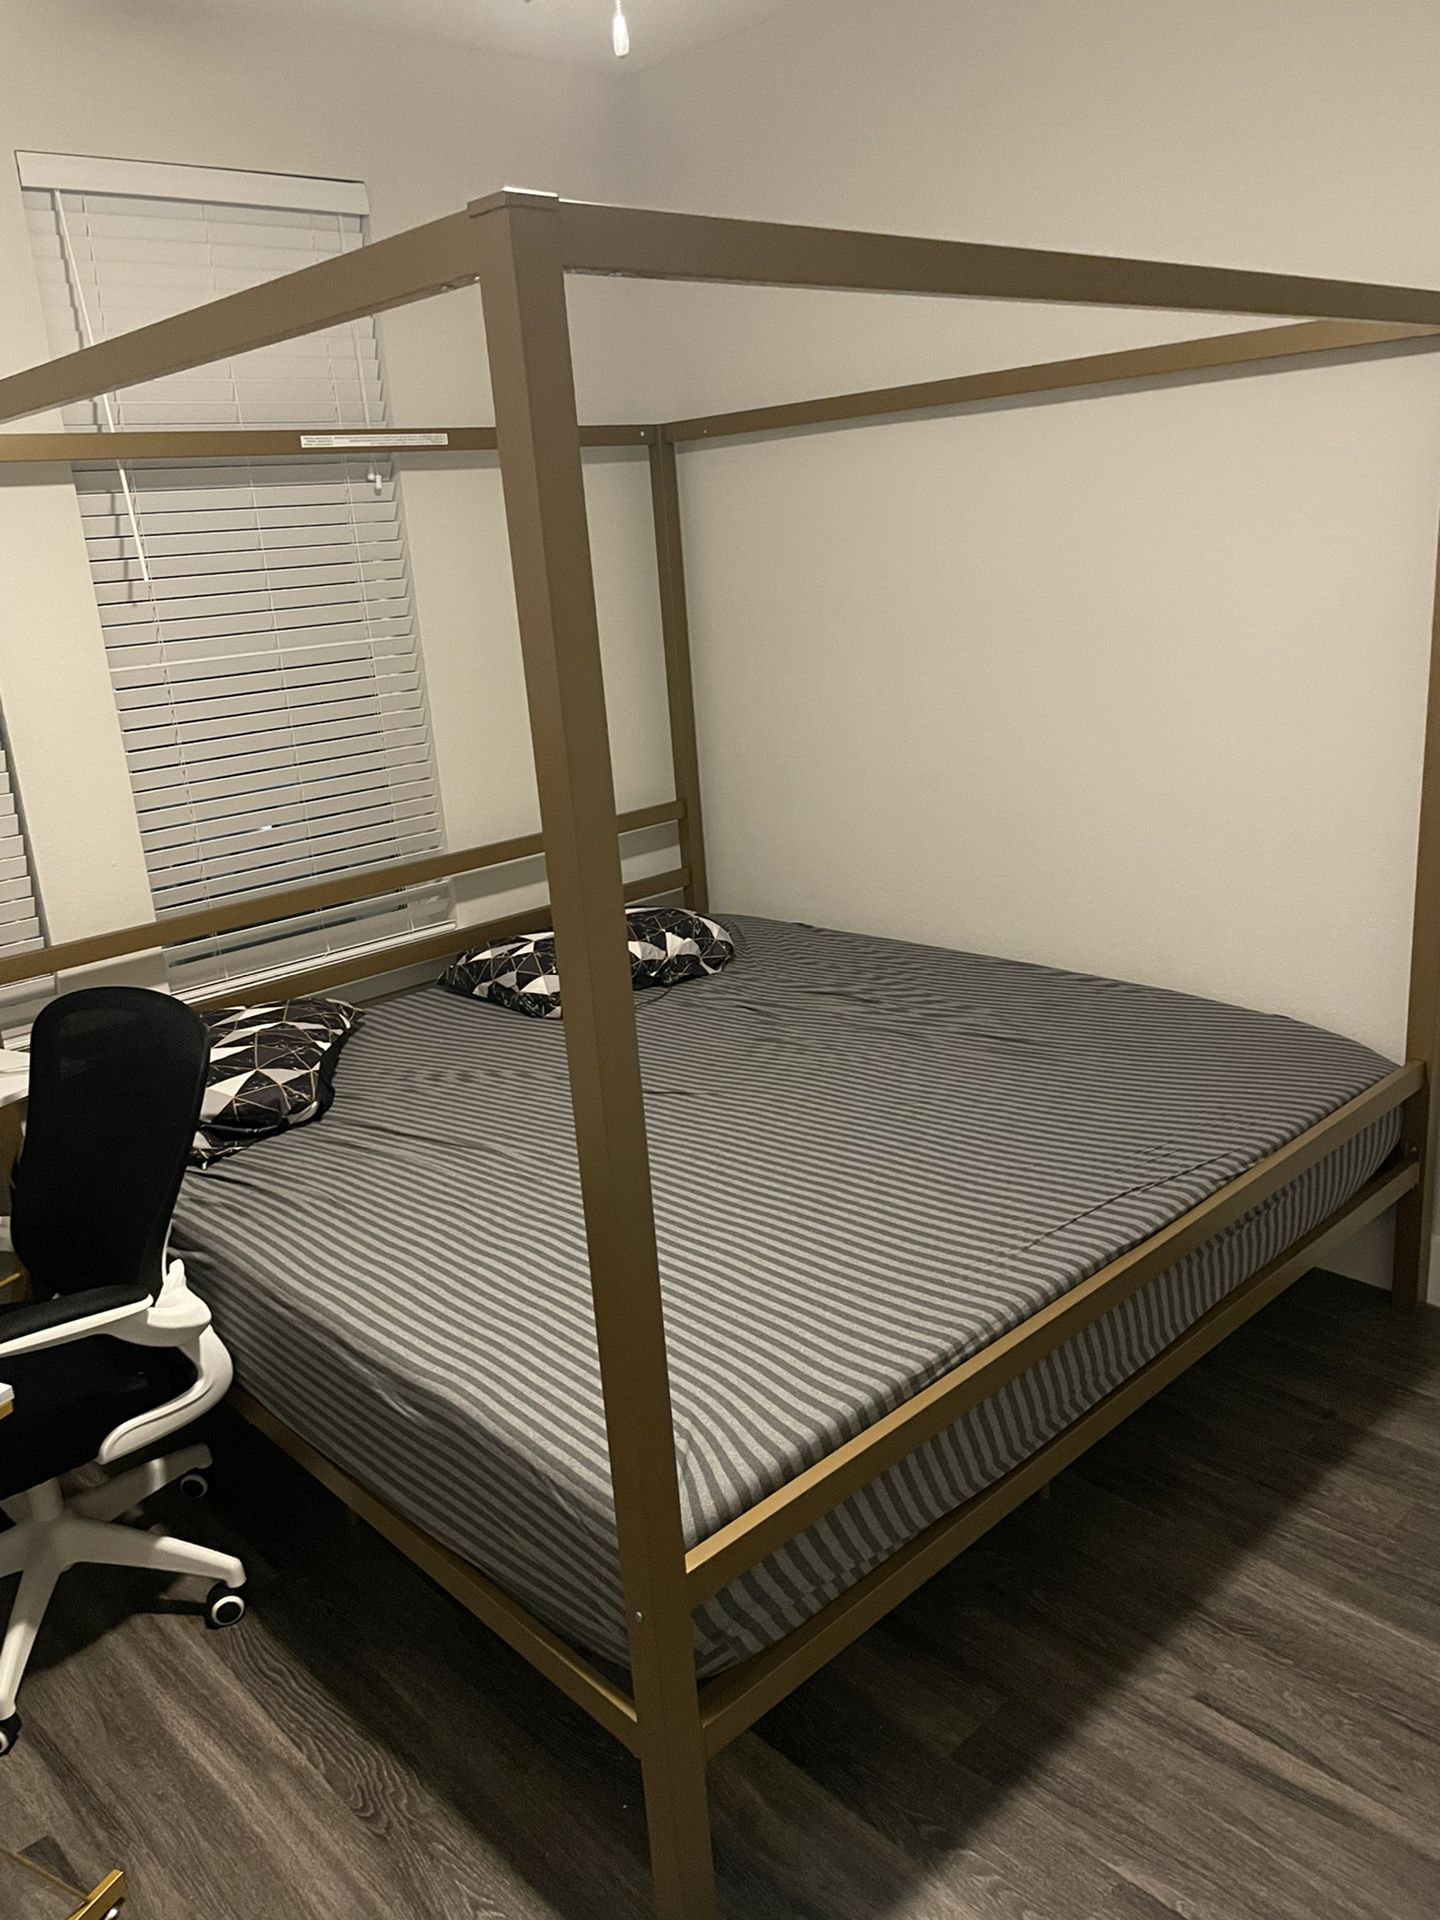 King Size Canopy Bed And Mattress (390$ Brand New)